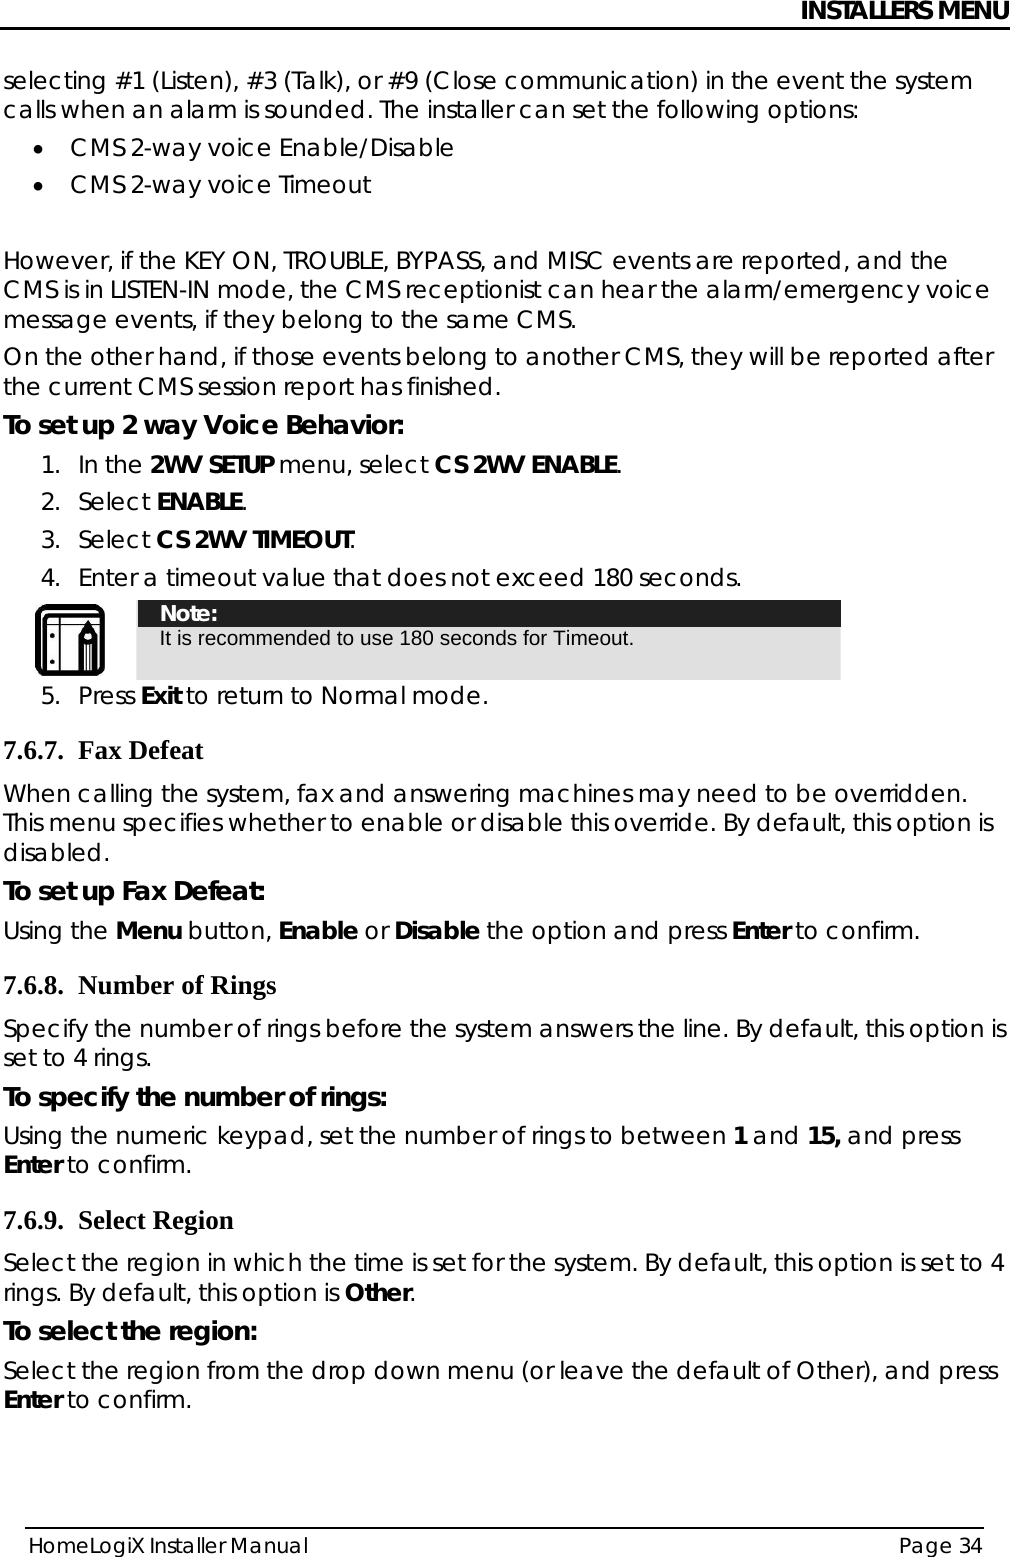 INSTALLERS MENU HomeLogiX Installer Manual  Page 34  selecting #1 (Listen), #3 (Talk), or #9 (Close communication) in the event the system calls when an alarm is sounded. The installer can set the following options: • CMS 2-way voice Enable/Disable • CMS 2-way voice Timeout  However, if the KEY ON, TROUBLE, BYPASS, and MISC events are reported, and the CMS is in LISTEN-IN mode, the CMS receptionist can hear the alarm/emergency voice message events, if they belong to the same CMS. On the other hand, if those events belong to another CMS, they will be reported after the current CMS session report has finished. To set up 2 way Voice Behavior: 1. In the 2WV SETUP menu, select CS 2WV ENABLE. 2. Select ENABLE. 3. Select CS 2WV TIMEOUT. 4. Enter a timeout value that does not exceed 180 seconds.  Note: It is recommended to use 180 seconds for Timeout. 5. Press Exit to return to Normal mode. 7.6.7. Fax Defeat When calling the system, fax and answering machines may need to be overridden. This menu specifies whether to enable or disable this override. By default, this option is disabled.  To set up Fax Defeat: Using the Menu button, Enable or Disable the option and press Enter to confirm. 7.6.8. Number of Rings Specify the number of rings before the system answers the line. By default, this option is set to 4 rings. To specify the number of rings: Using the numeric keypad, set the number of rings to between 1 and 15, and press Enter to confirm. 7.6.9. Select Region Select the region in which the time is set for the system. By default, this option is set to 4 rings. By default, this option is Other. To select the region: Select the region from the drop down menu (or leave the default of Other), and press Enter to confirm.   